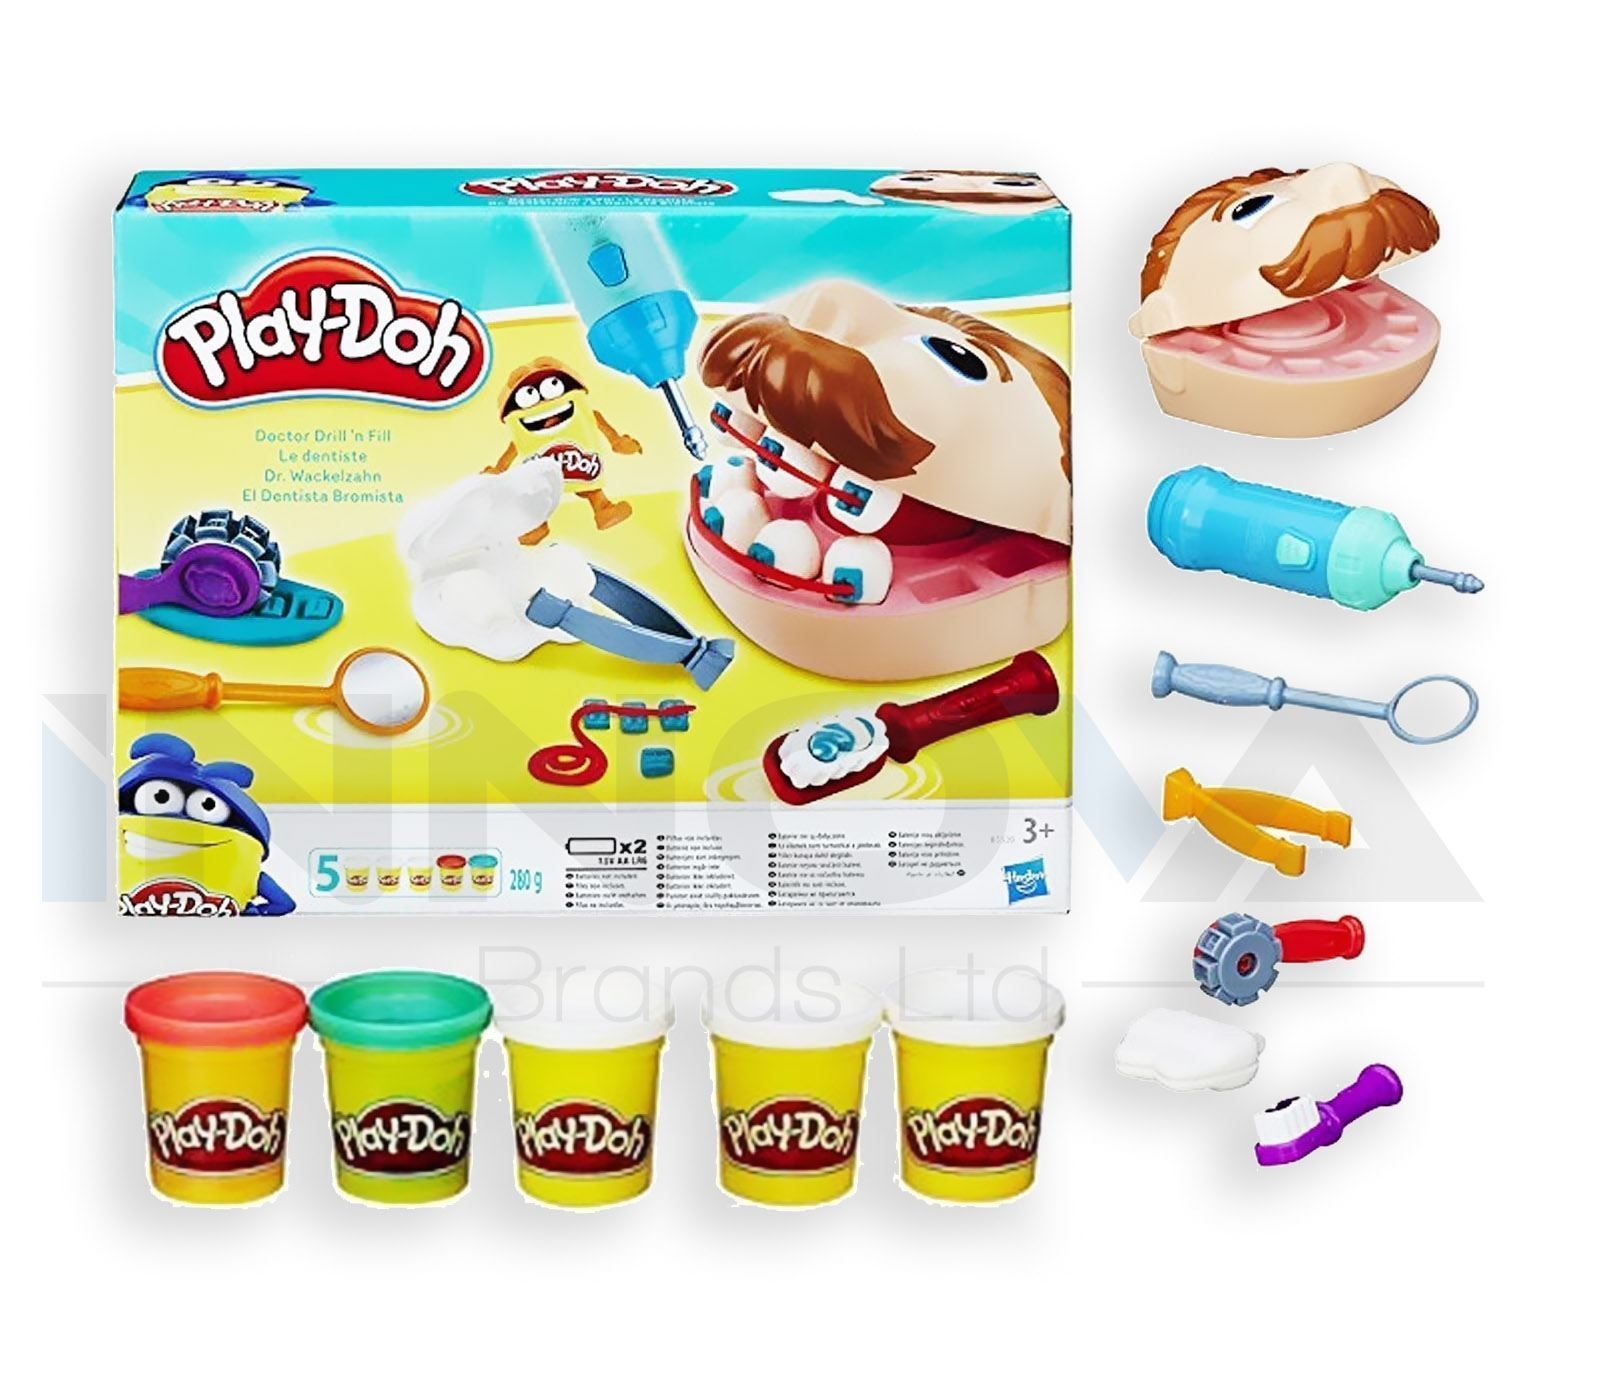 dr play doh